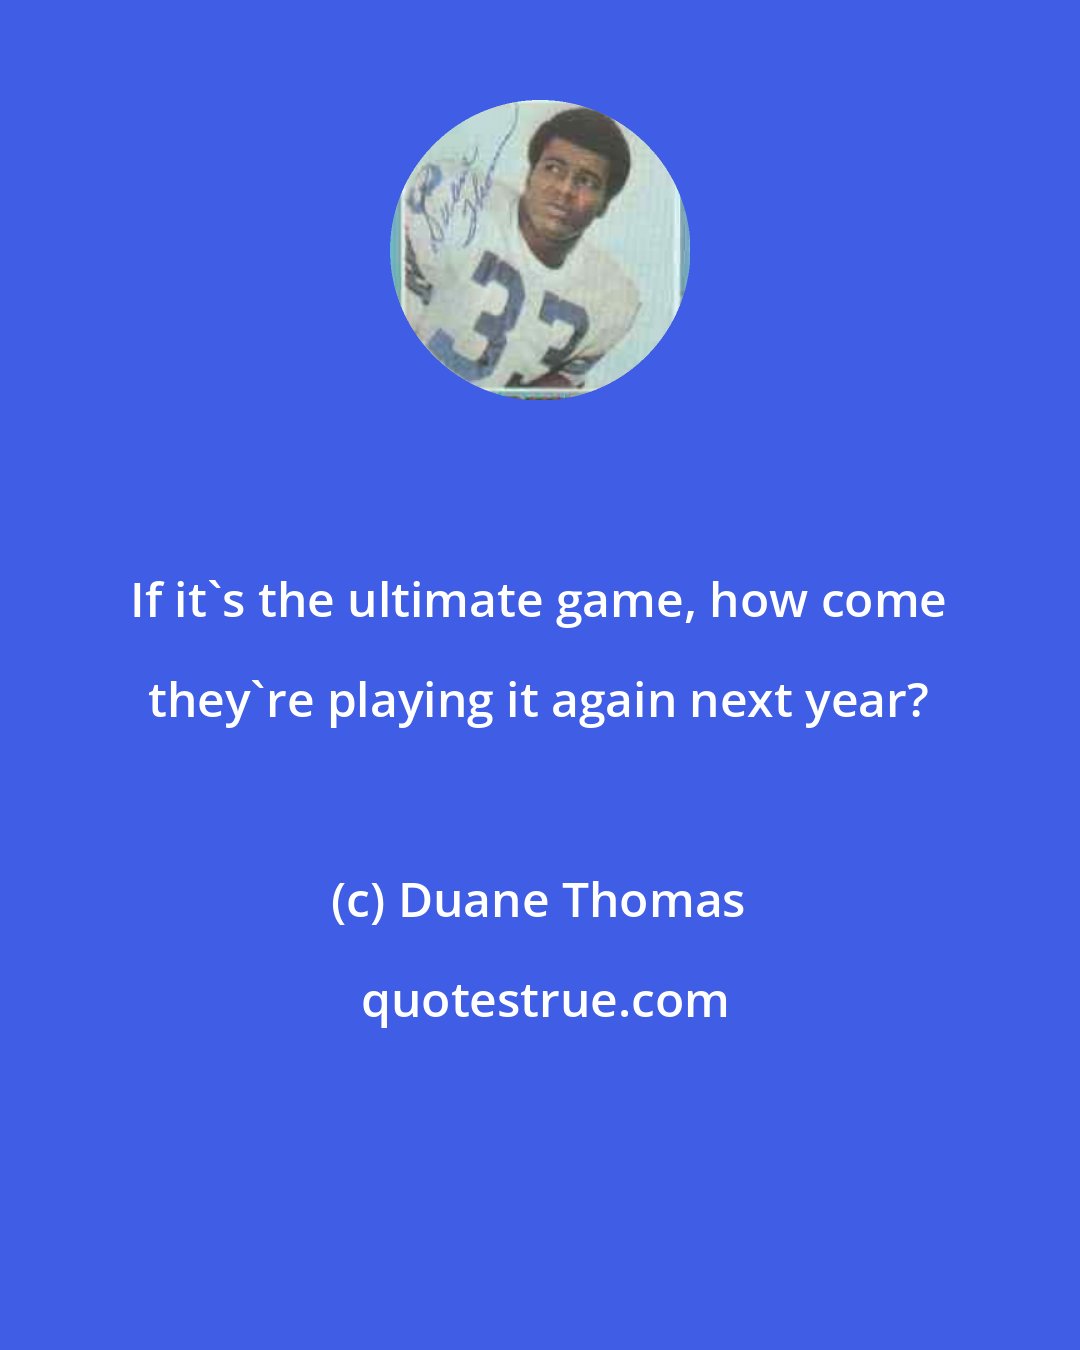 Duane Thomas: If it's the ultimate game, how come they're playing it again next year?